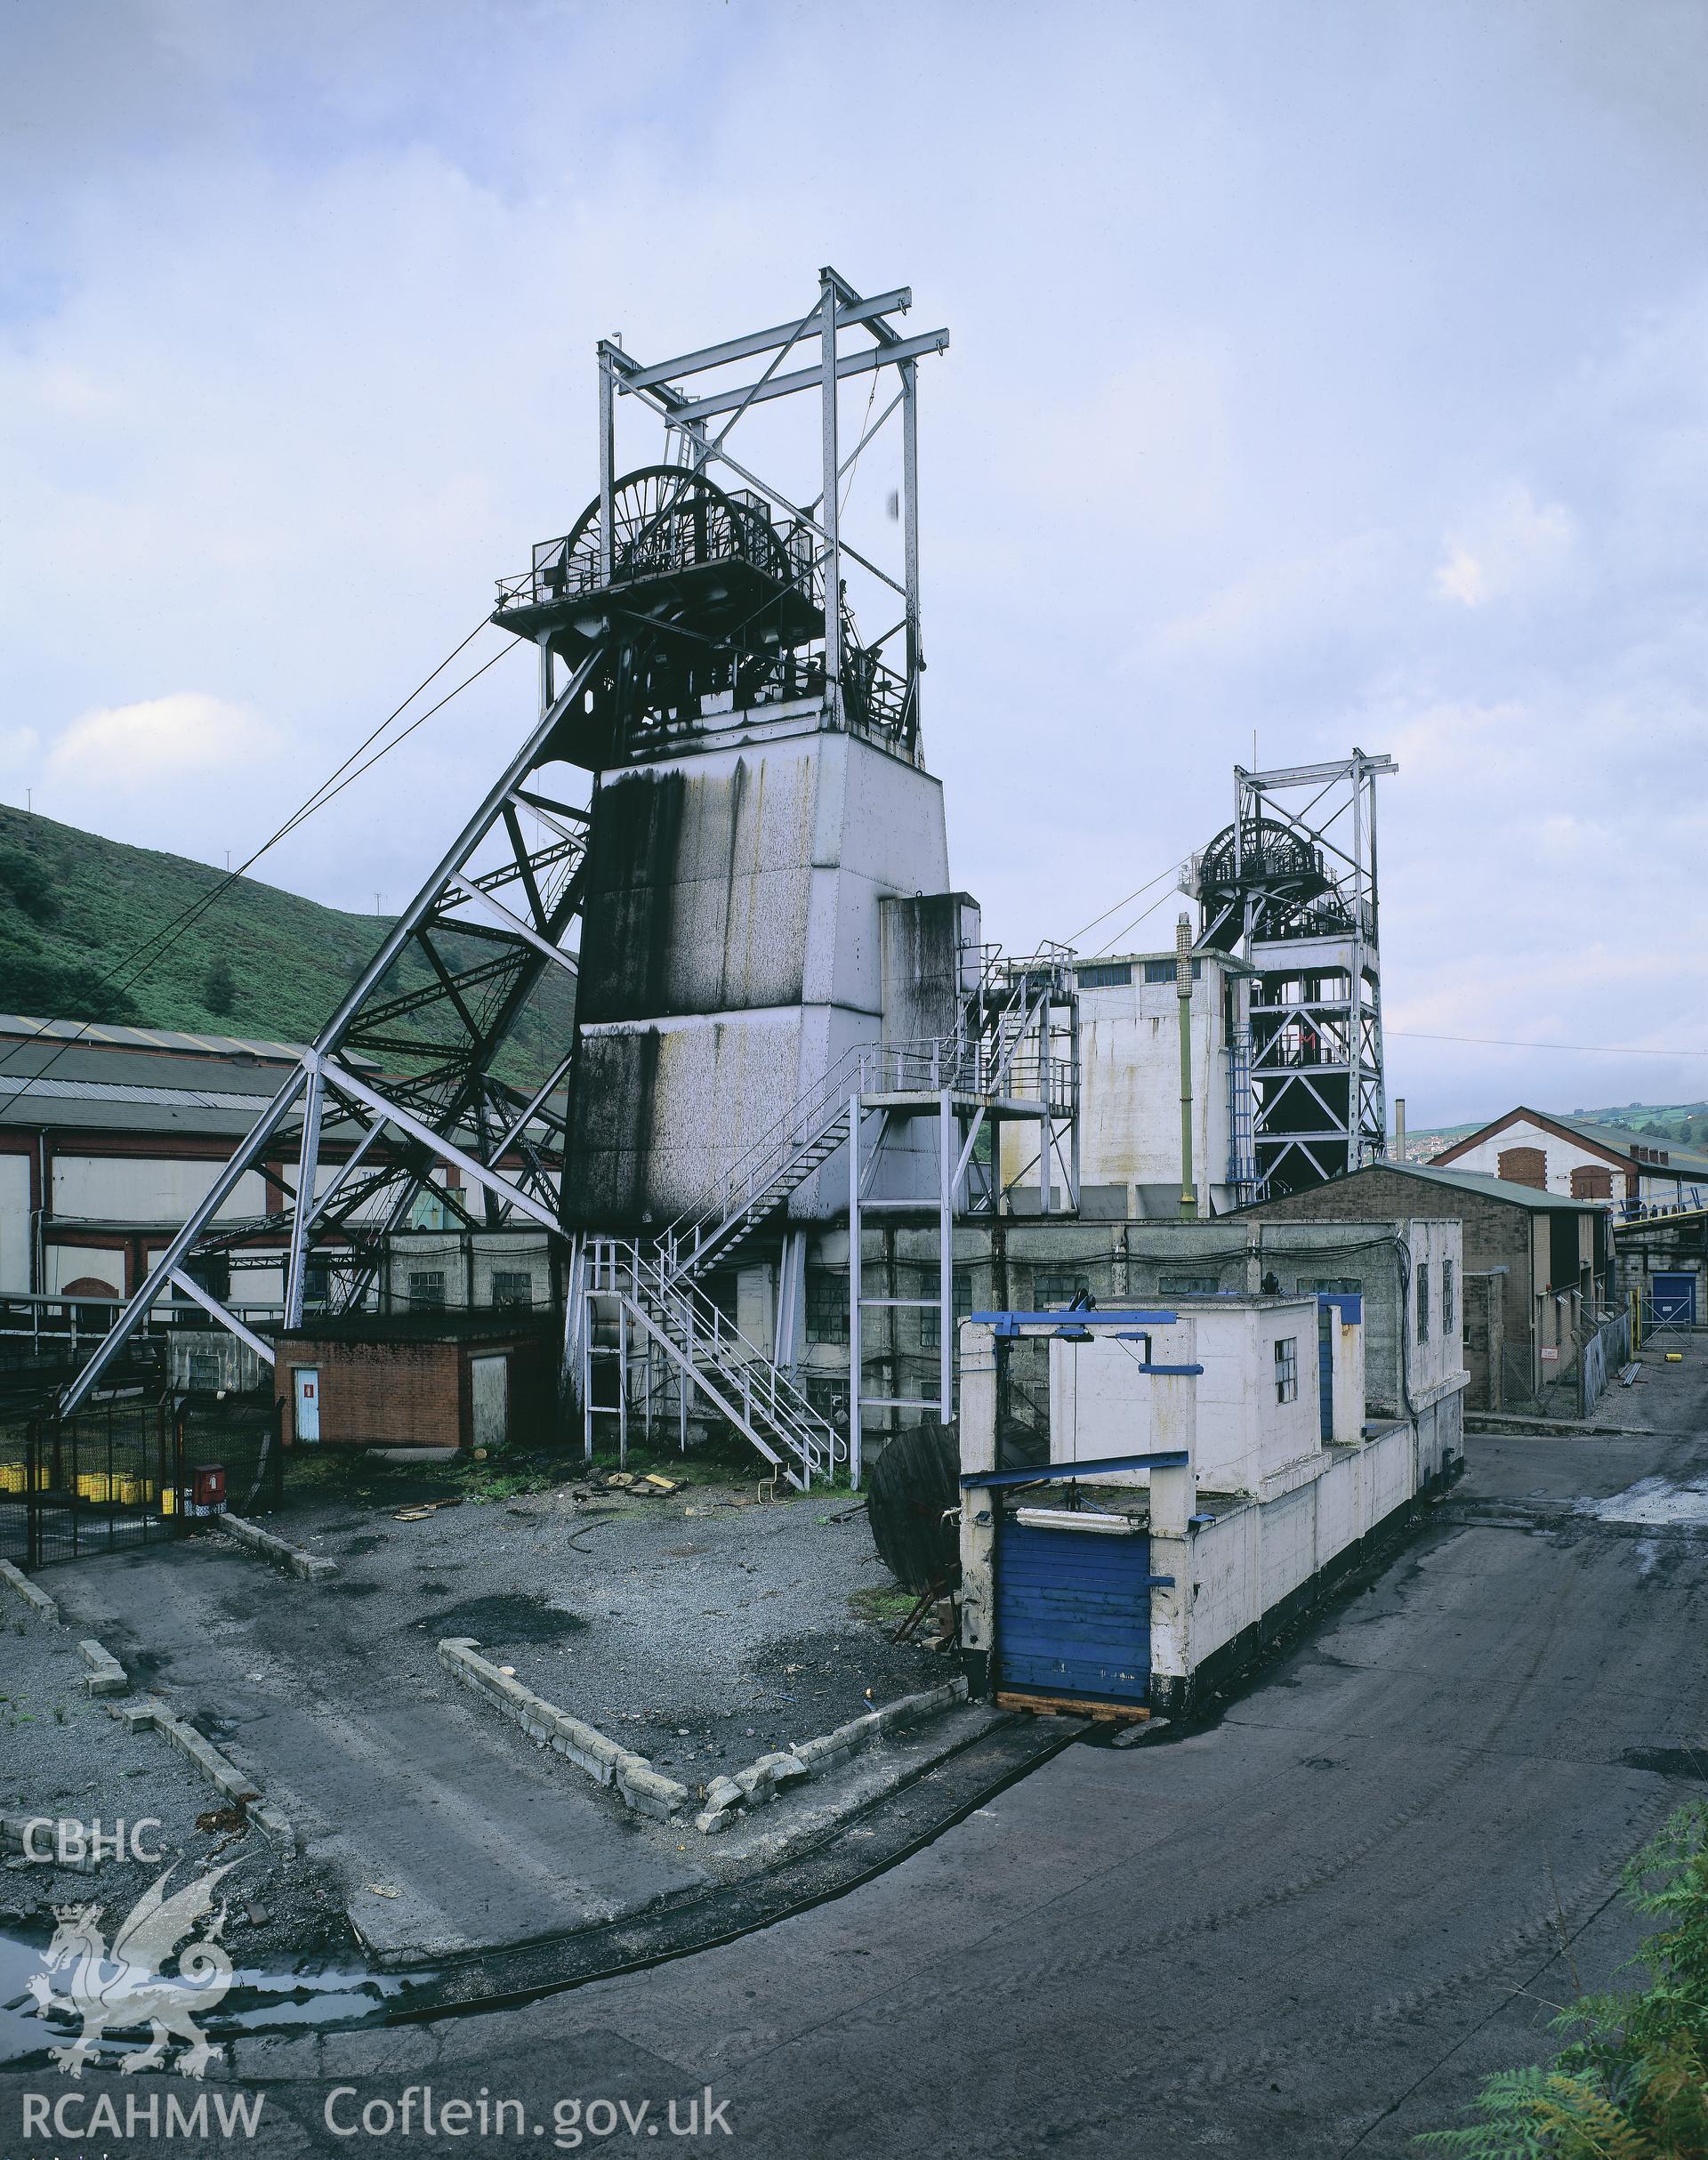 RCAHMW colour transparency of a view of a winding tower at Taff Merthyr Colliery.